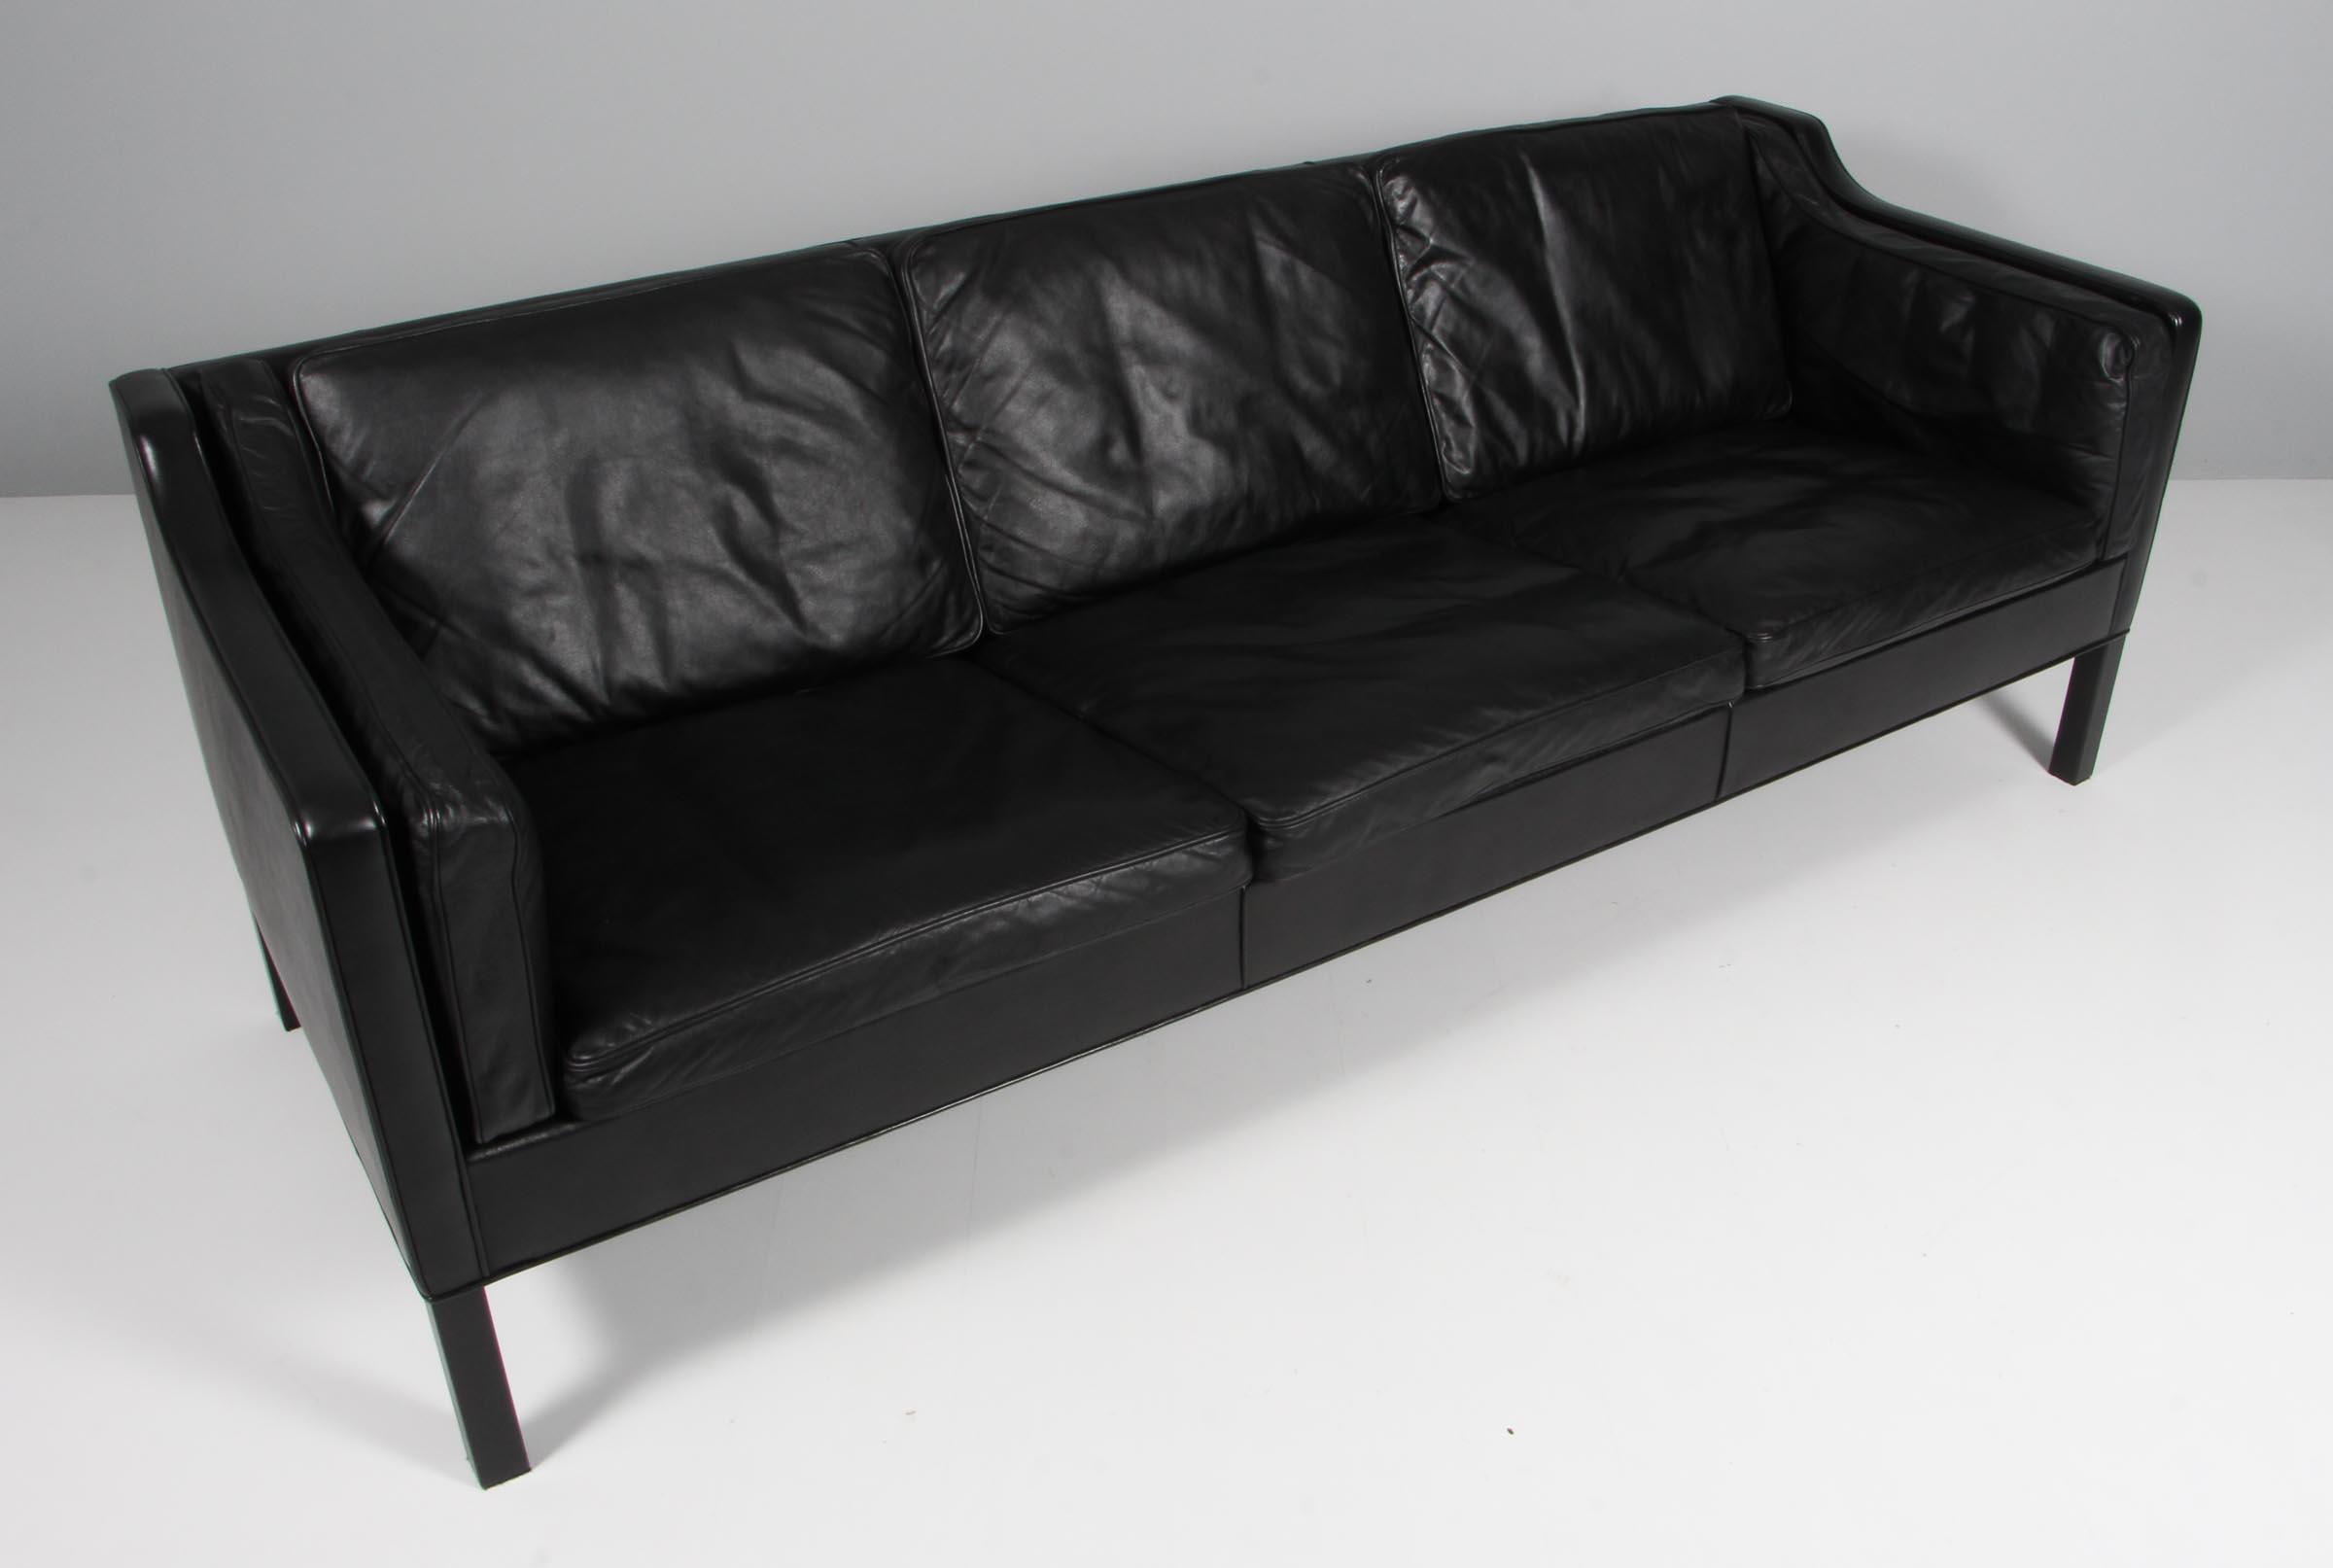 Børge Mogensen three-seat sofa with original black leather upholstery.

Legs of black lacquered wood.

Model 2213, made by Fredericia Furniture.